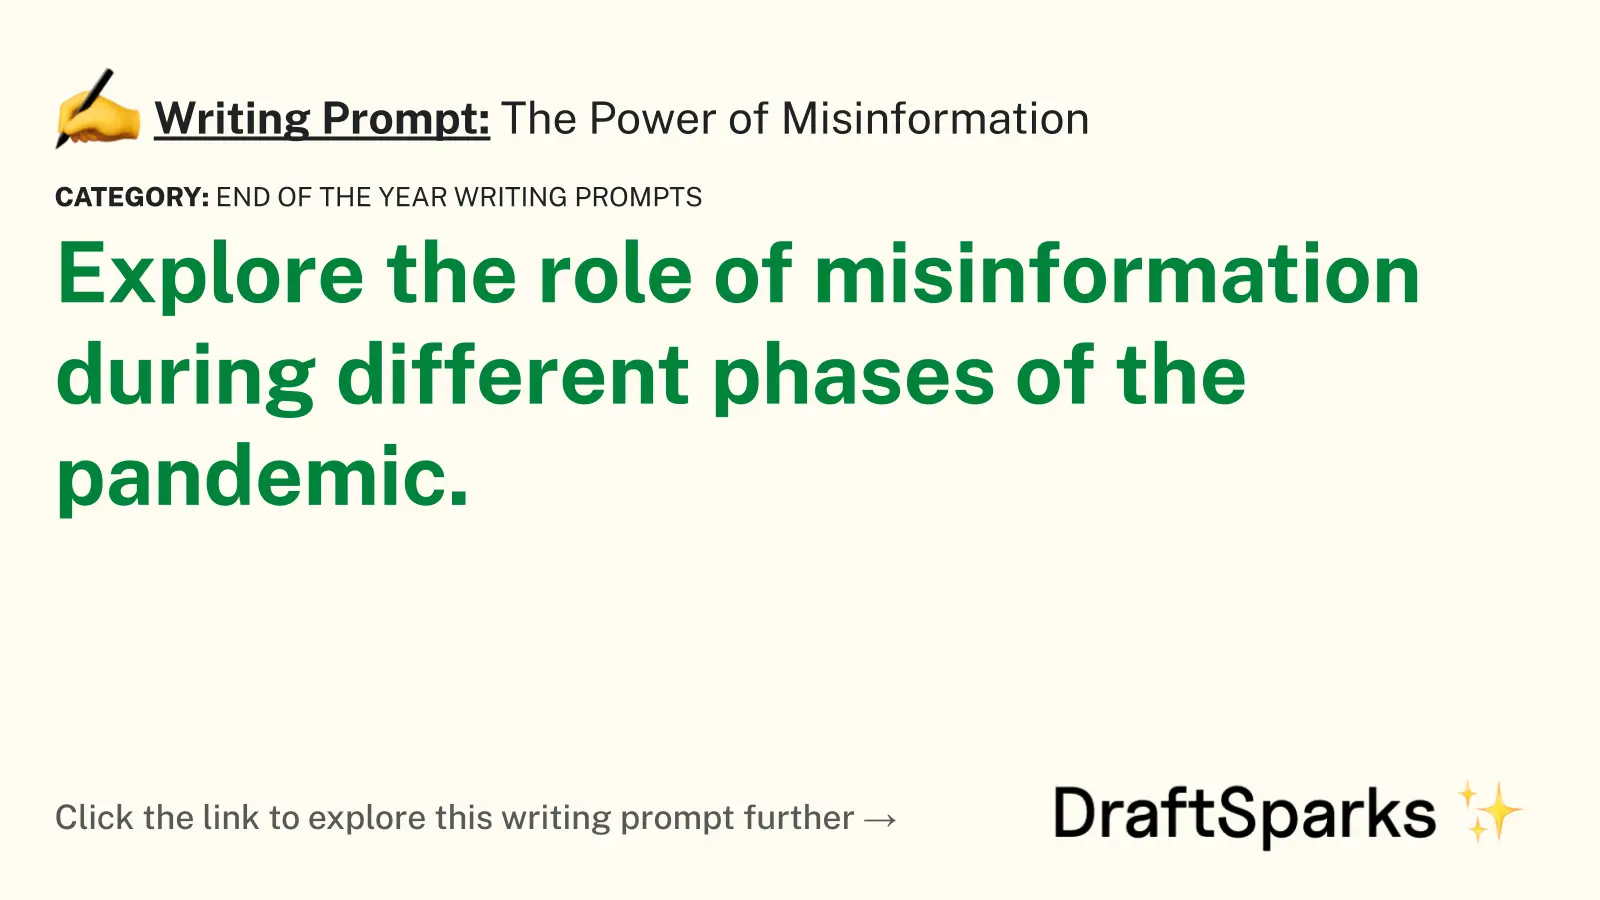 The Power of Misinformation